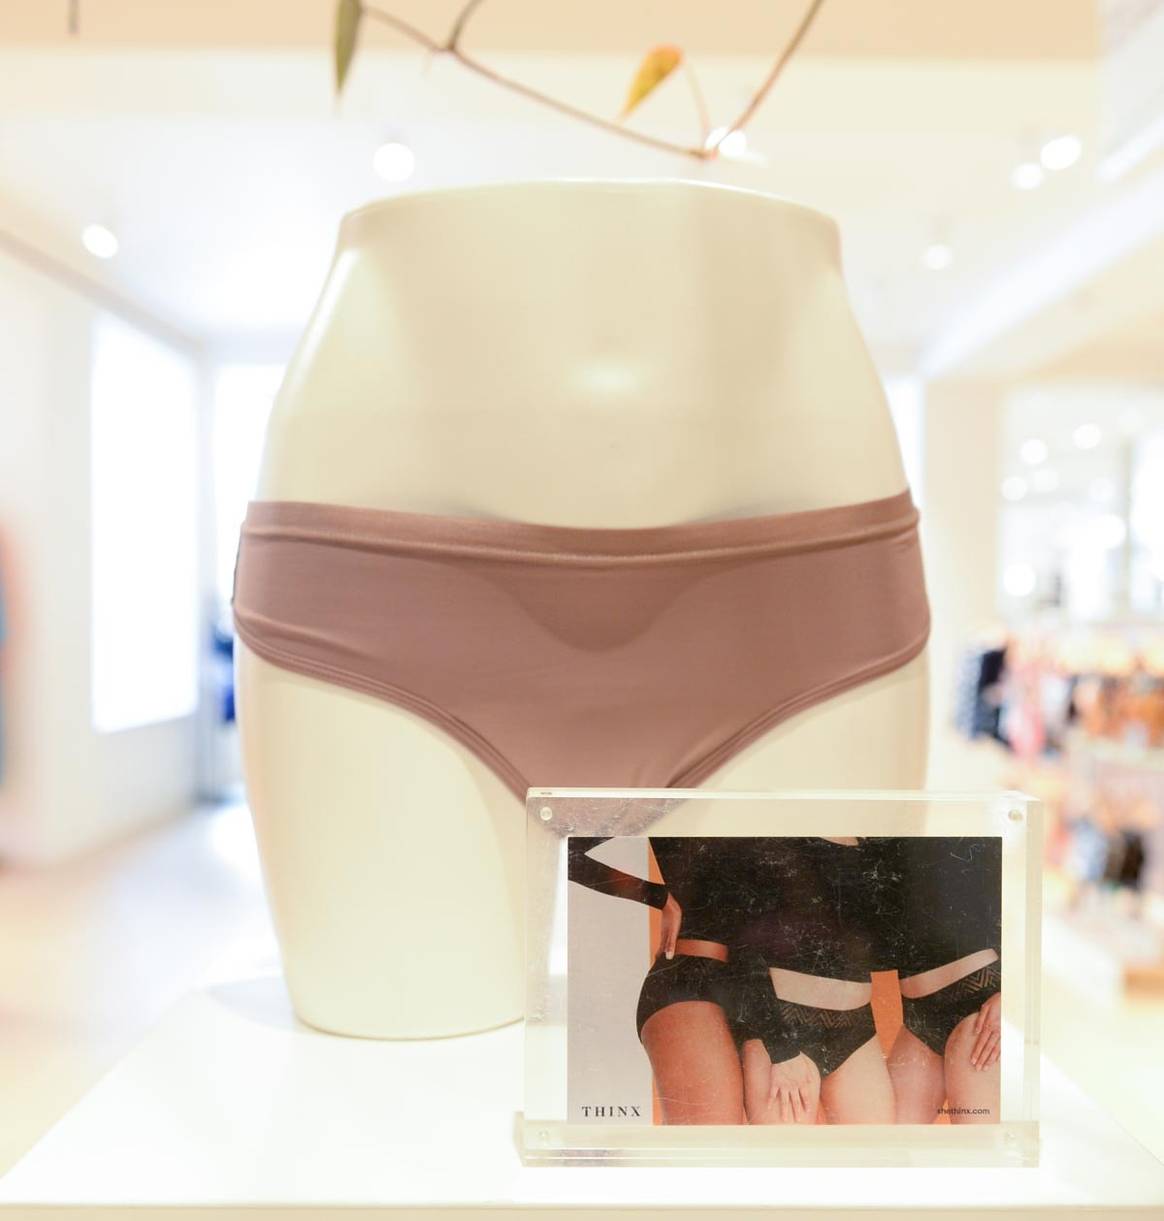 Thinx and Selfridges team up on a window display about periods